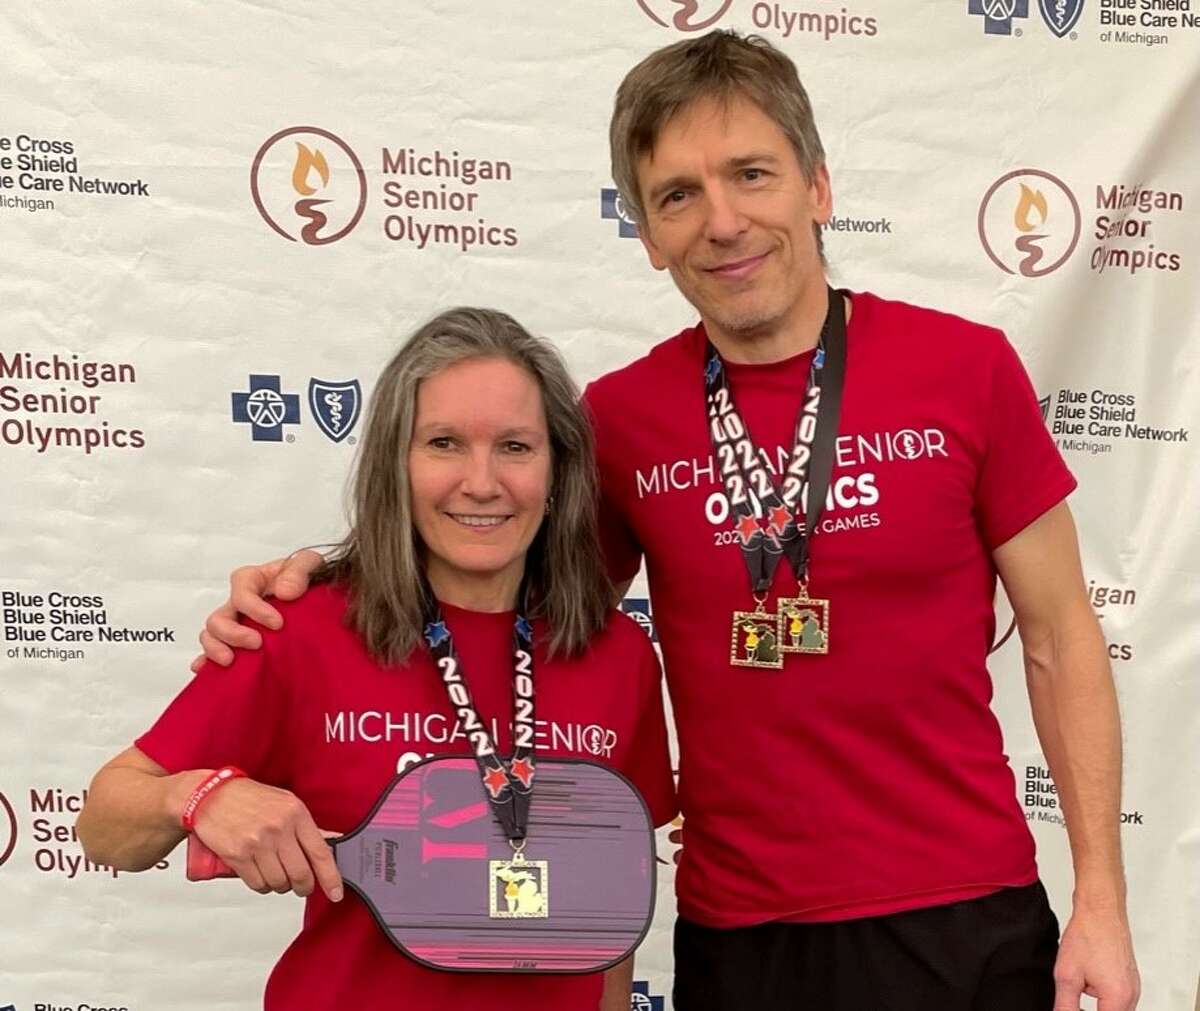 Simon Toth and Maureen "Mo" Acker, both of Midland, won a gold medal in mixed doubles, 55-59 age group, for pickleball at the Michigan Senior Olympics, March 5-7.